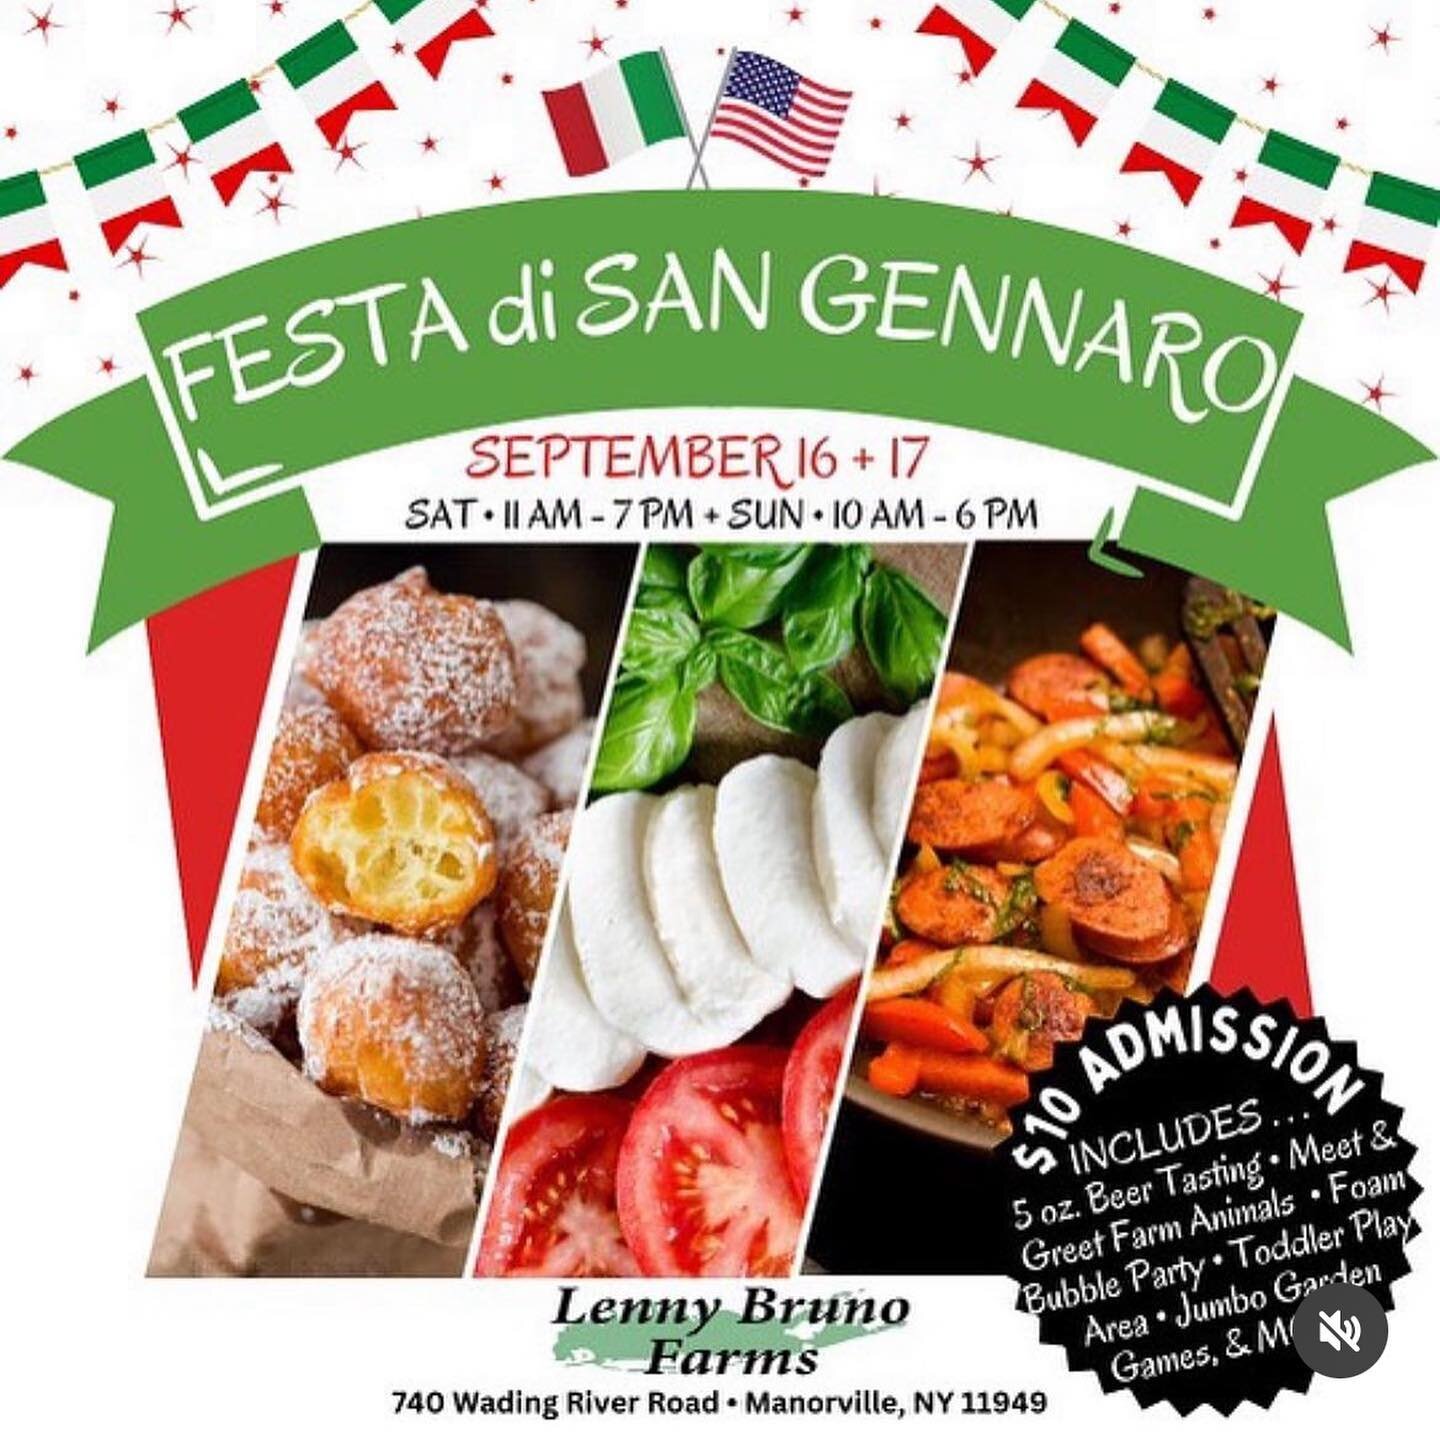 CLOSED today and popping up at @lennybrunofarms for the San Gennaro Feast!!! Smoked chicken, fresh Mozzarella, roasted red peppers, and balsamic glaze on a brioche bun will be up all day or while supplies last, see you at @lennybrunofarms!!! Mattituc